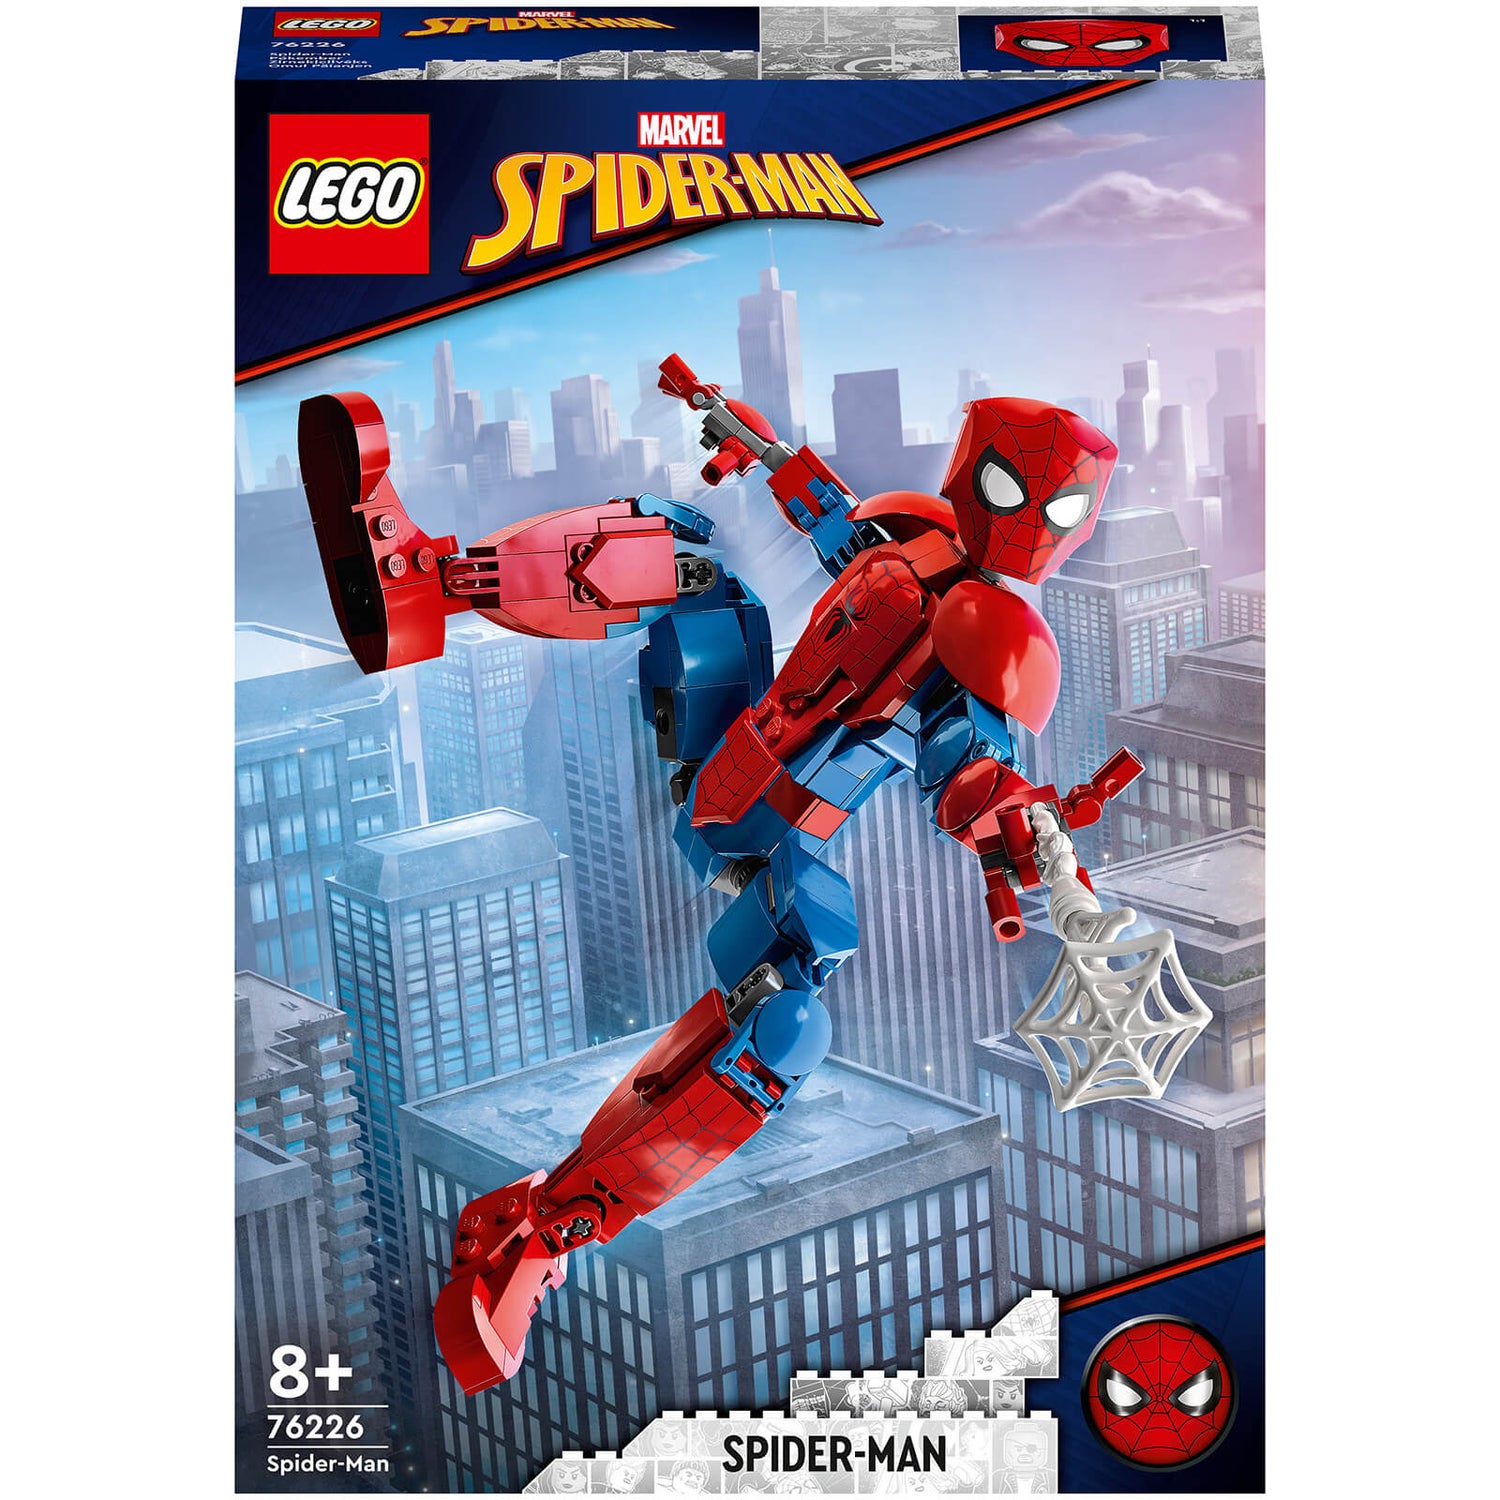 LEGO Super Heroes Spider-Man Buildable Figure (76226)